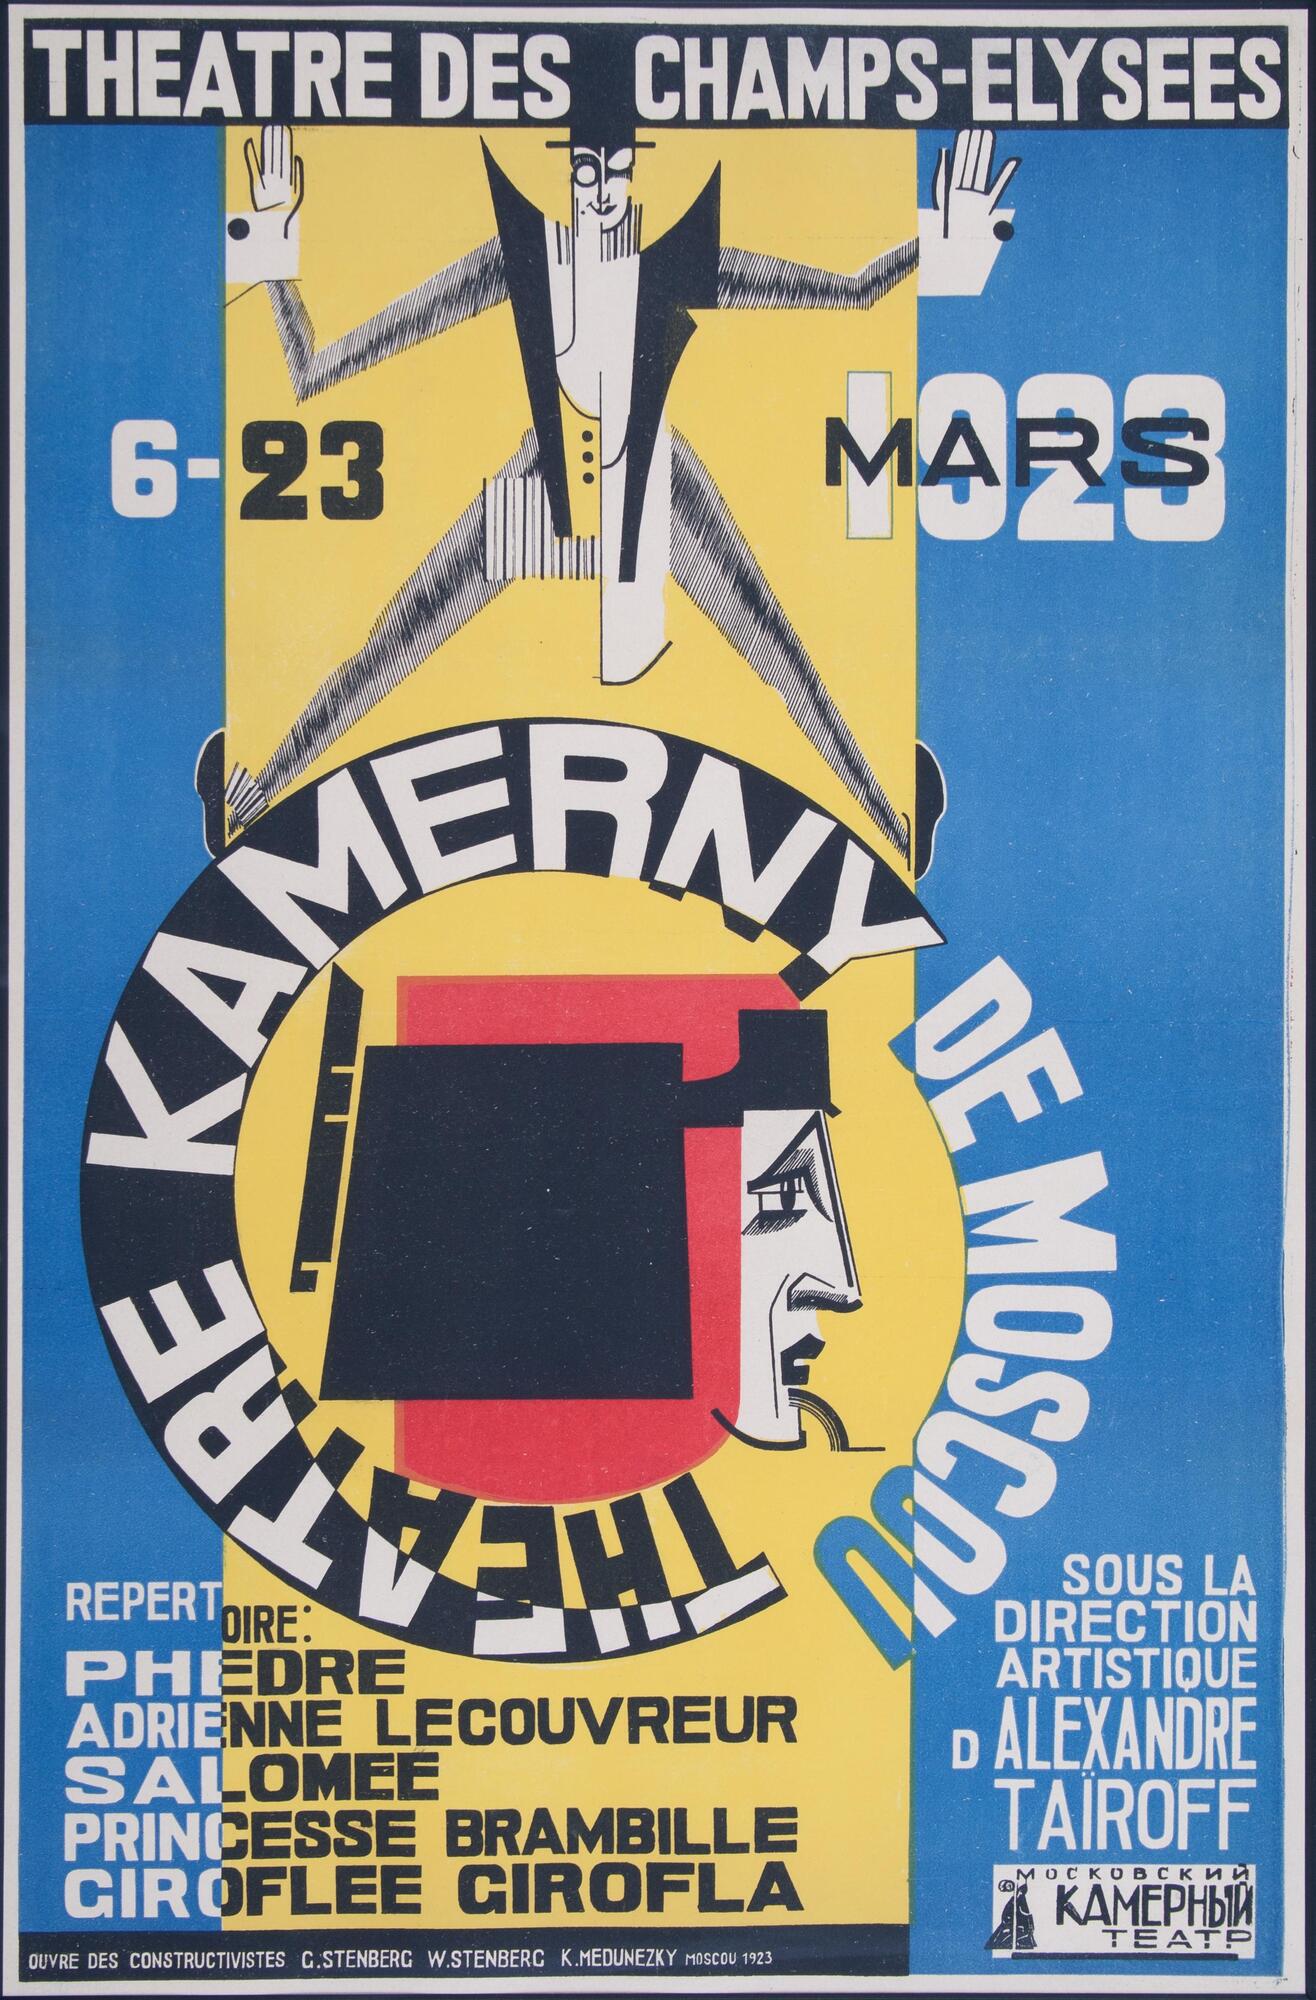 Overall blue, yellow, black, orange and white. There is a lot of text, in Russian and the image of a man in a top hat on top of the main circular wording doing a split. &quot;6-23 MARS 1923, Theatre des champs-elysees&quot;